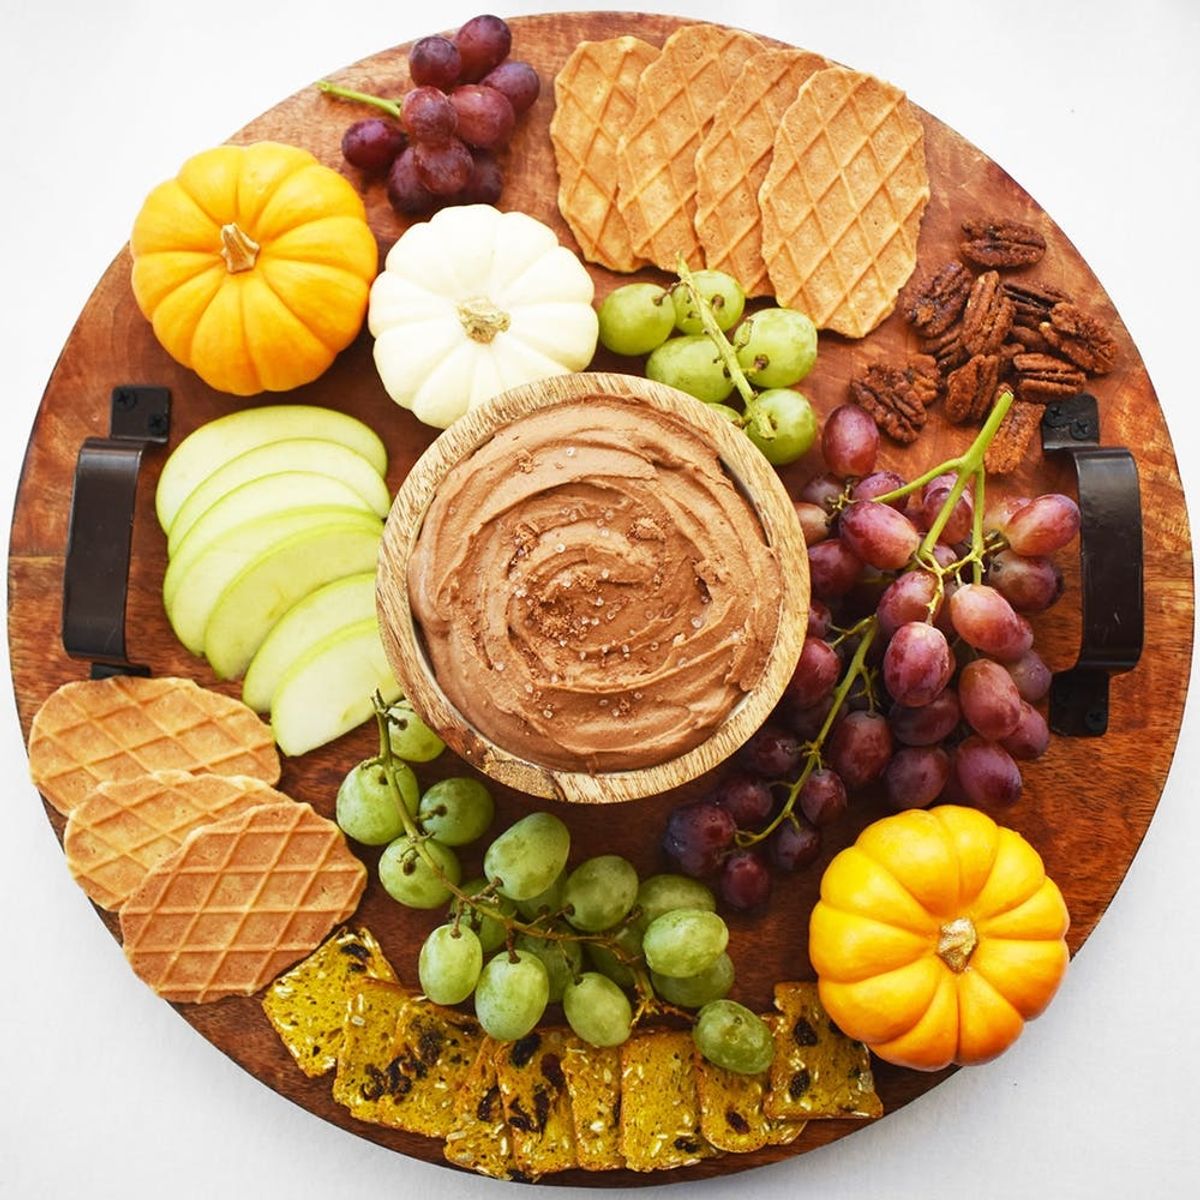 Make This Chocolate Hummus Recipe the Star of Your Fall Snacks